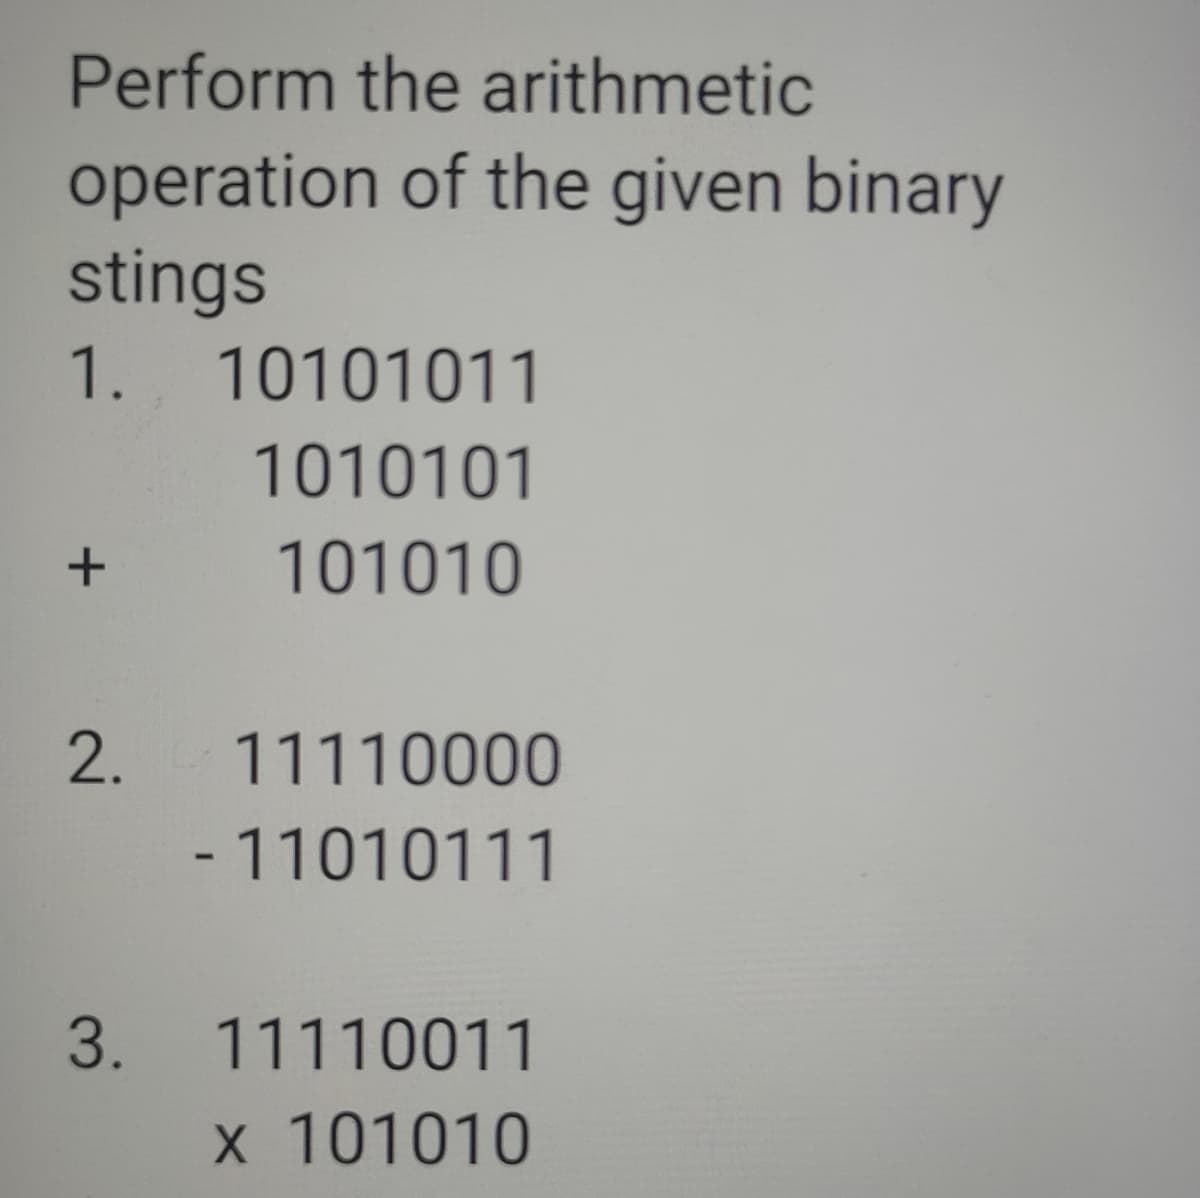 Perform the arithmetic
operation of the given binary
stings
1.
10101011
1010101
101010
11110000
- 11010111
3.
11110011
x 101010
2.
